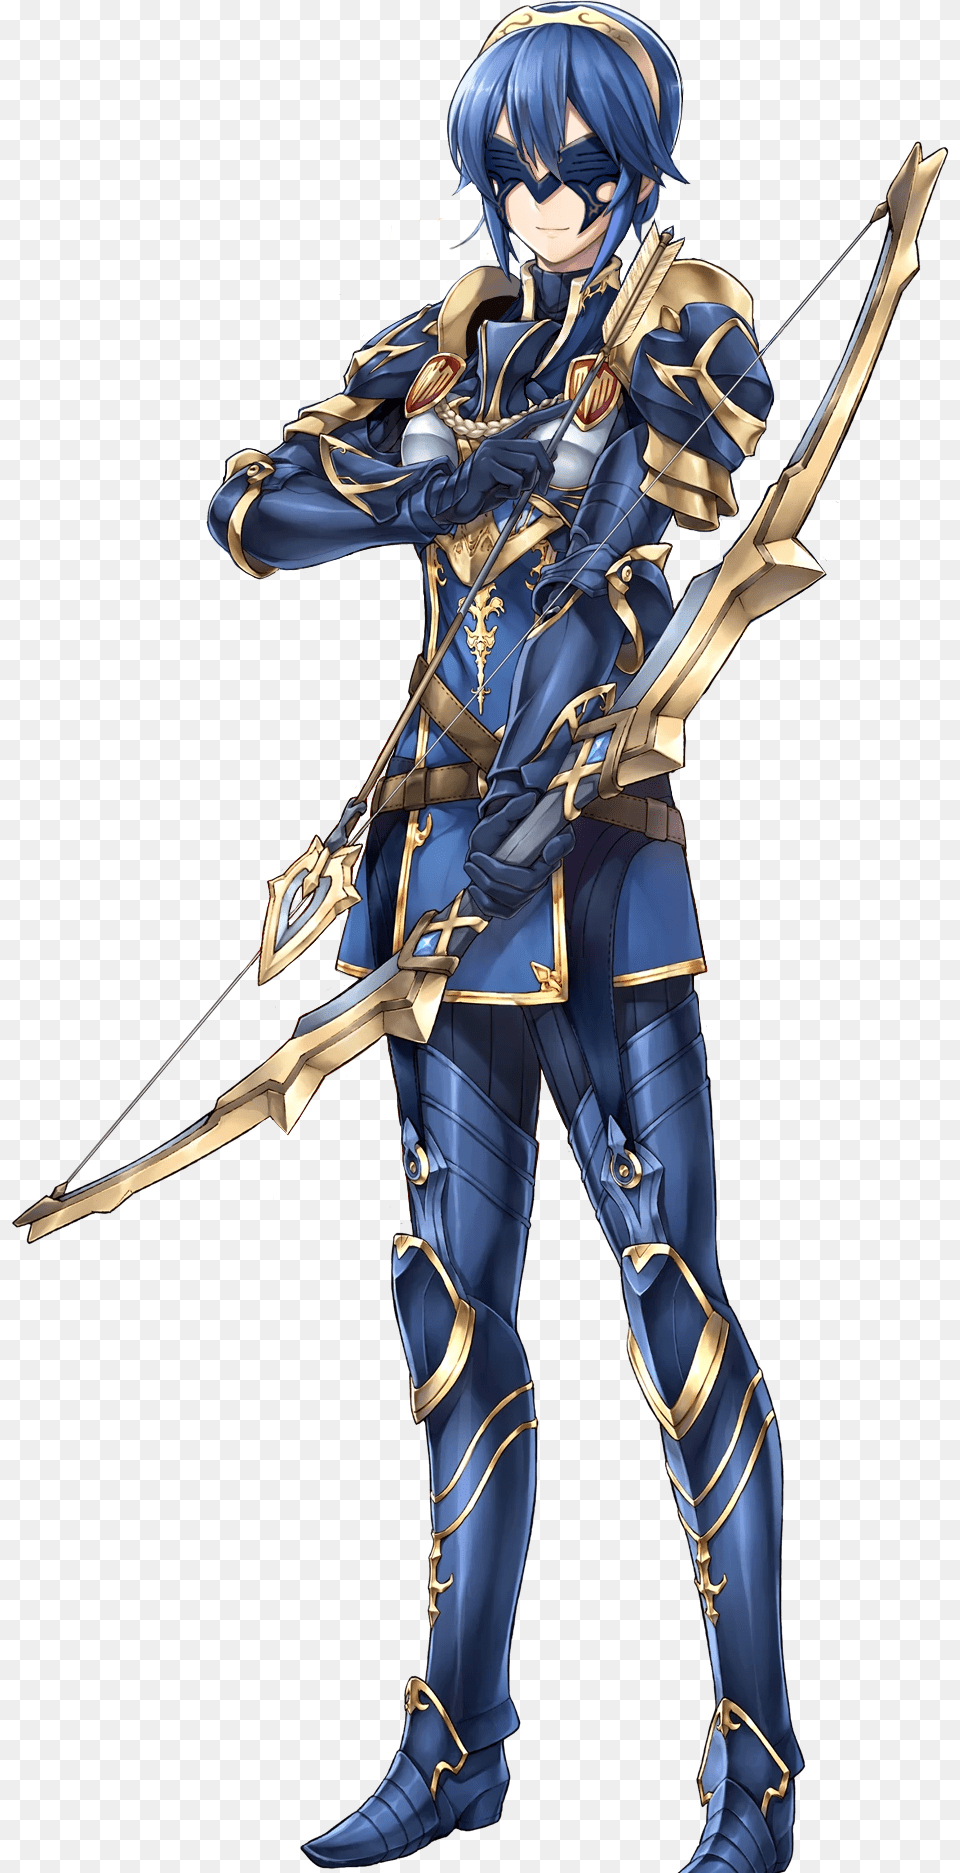 Fireemblemheroes Fire Emblem Heroes Lucina Archer, Weapon, Archery, Bow, Sport Png